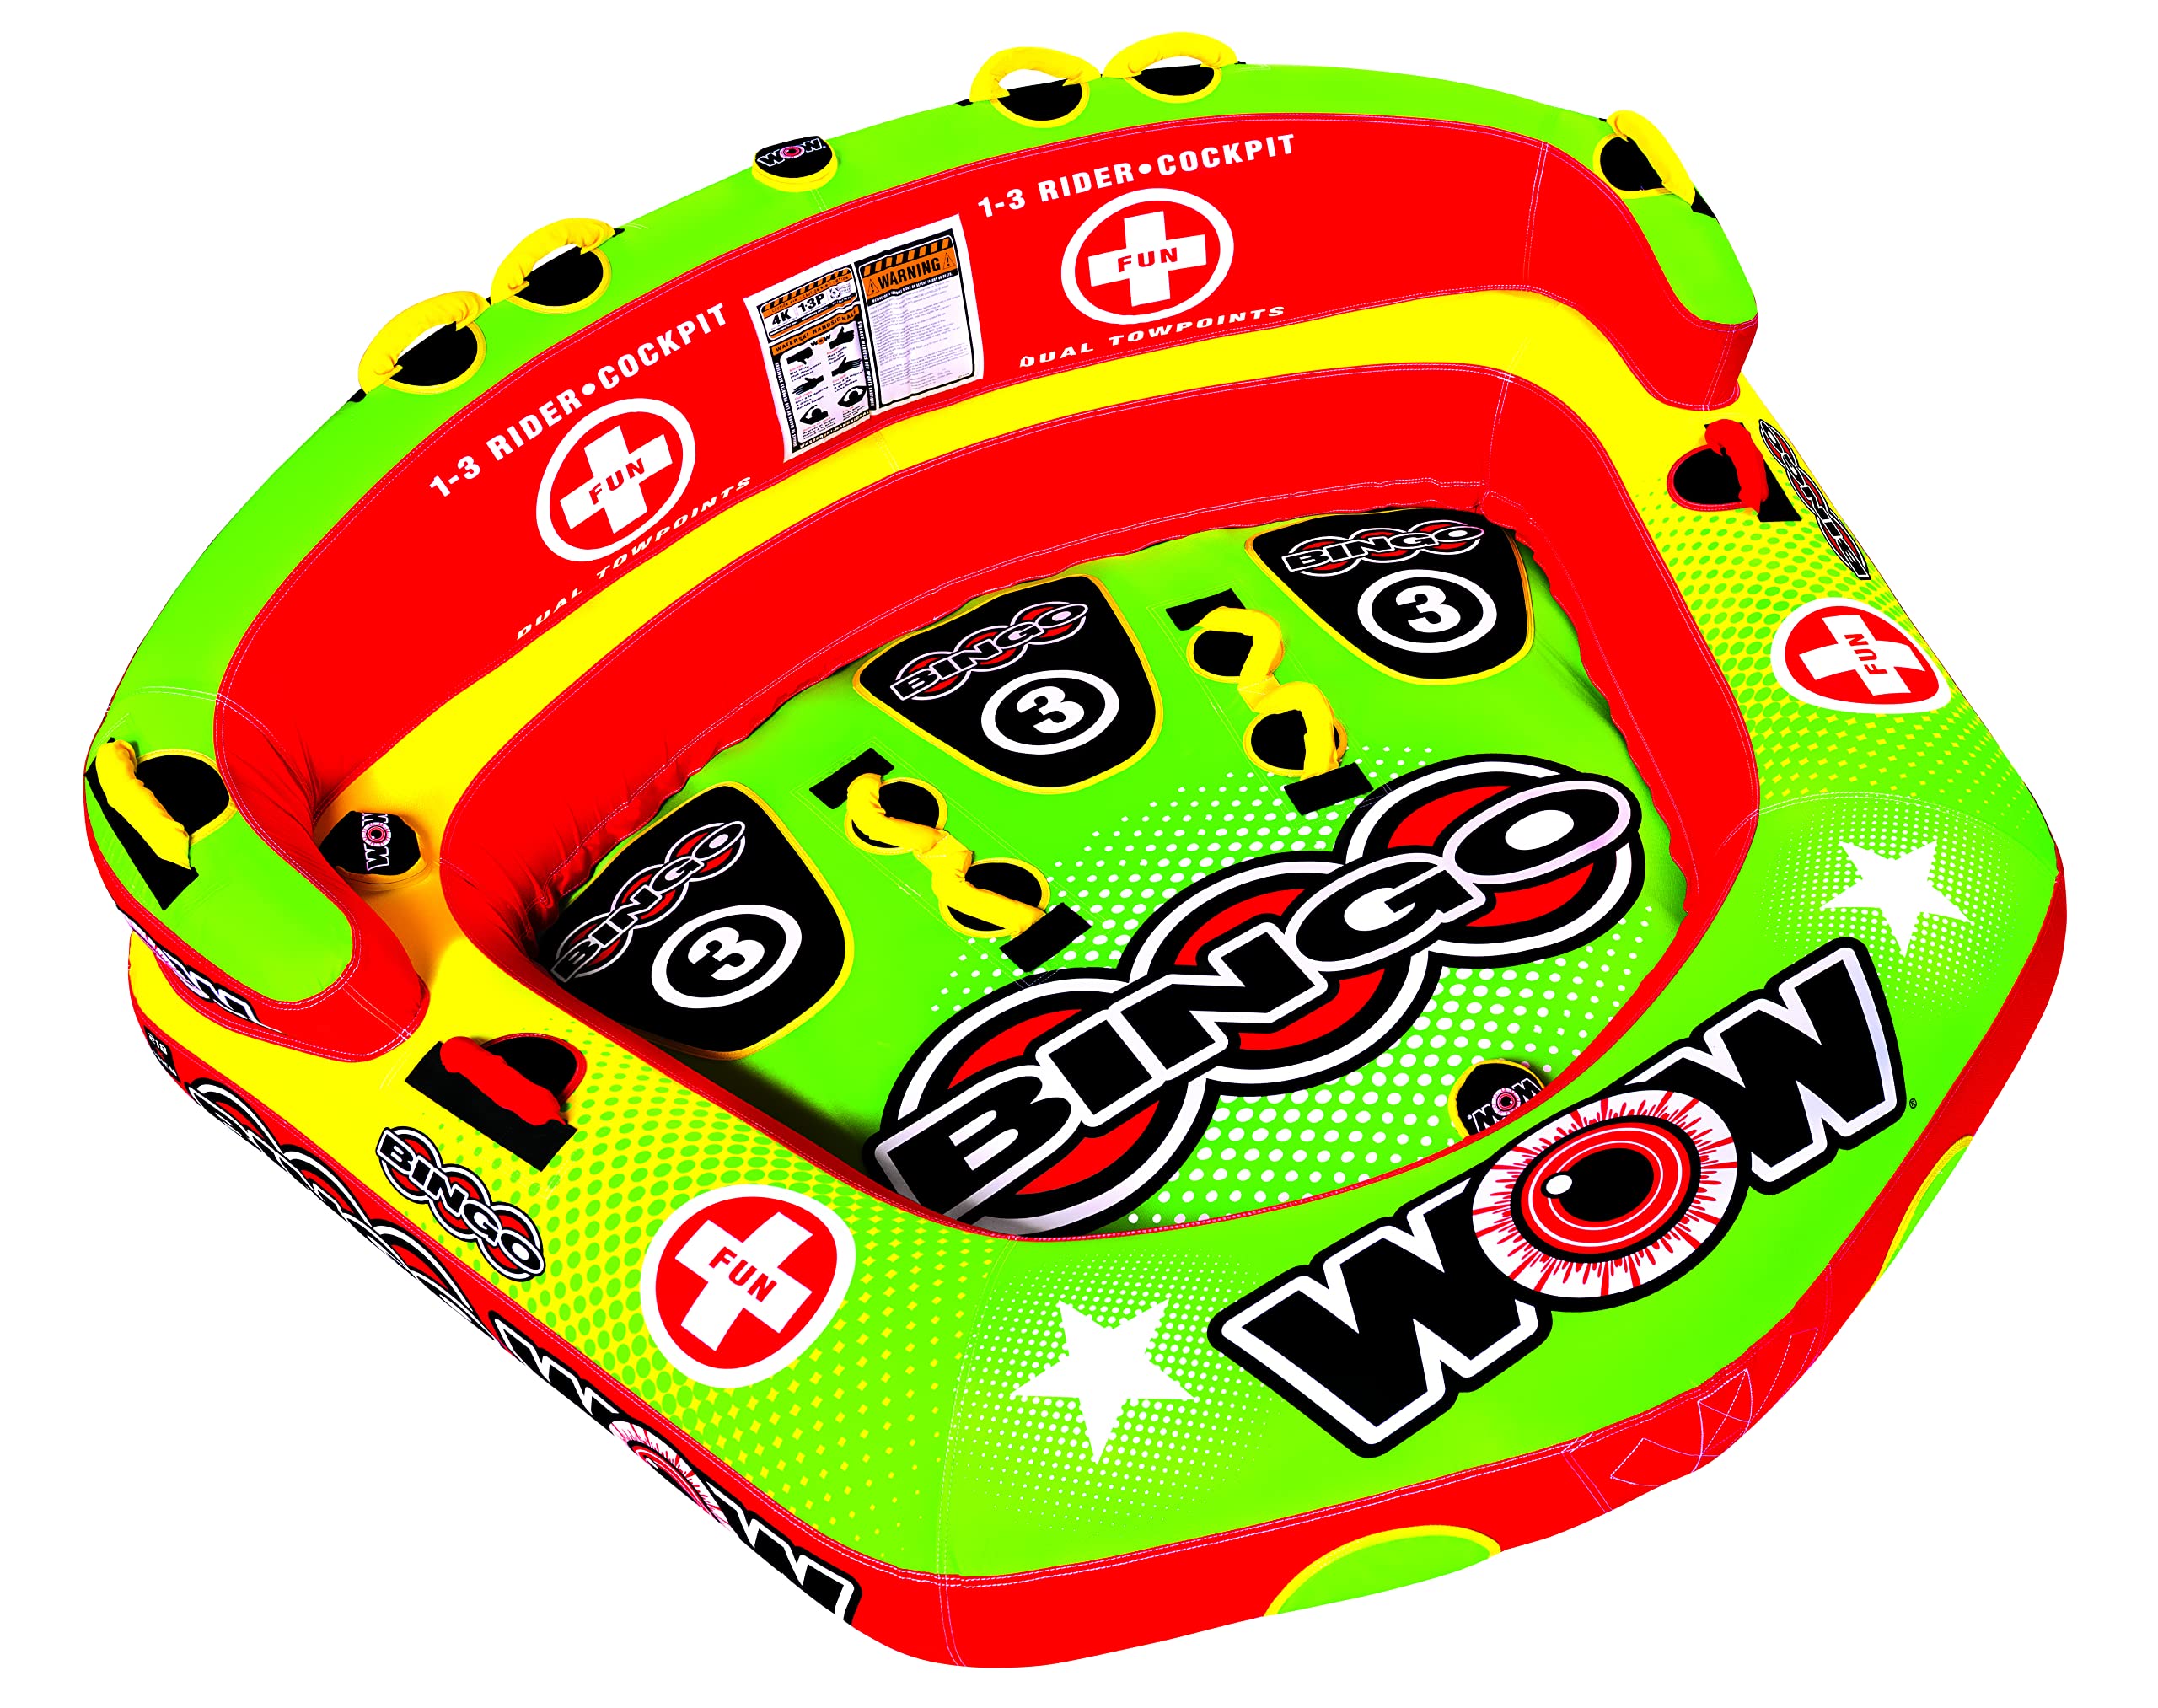 WOW World of Watersports Bingo Cockpit Inflatable Towable Cockpit Tube for Boating